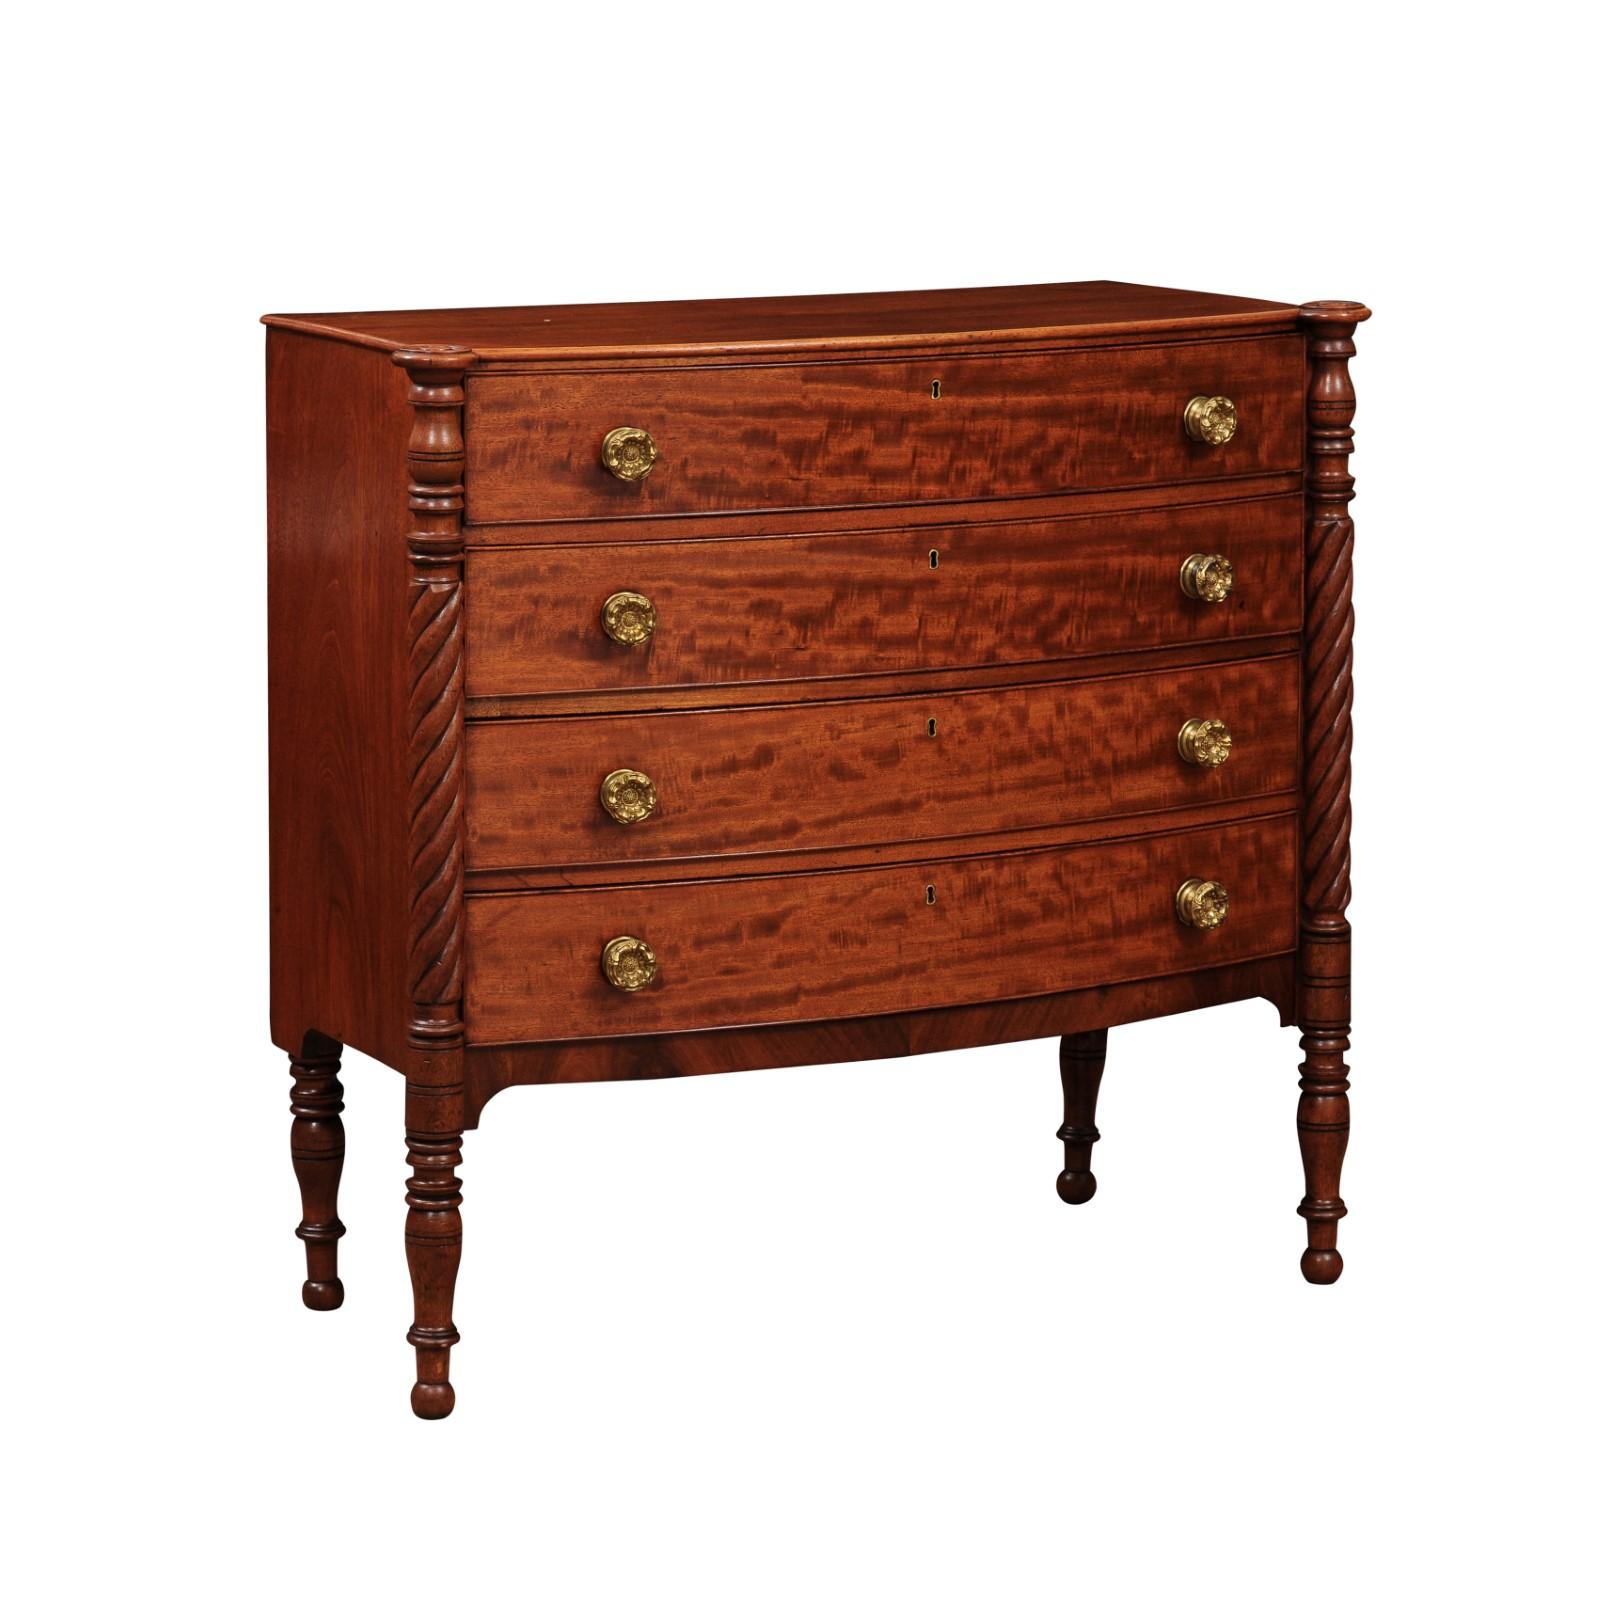 American Moses Mellen Boston Federal Bowfront Chest with 4 Drawers and Turned Legs, Early 19th Century
